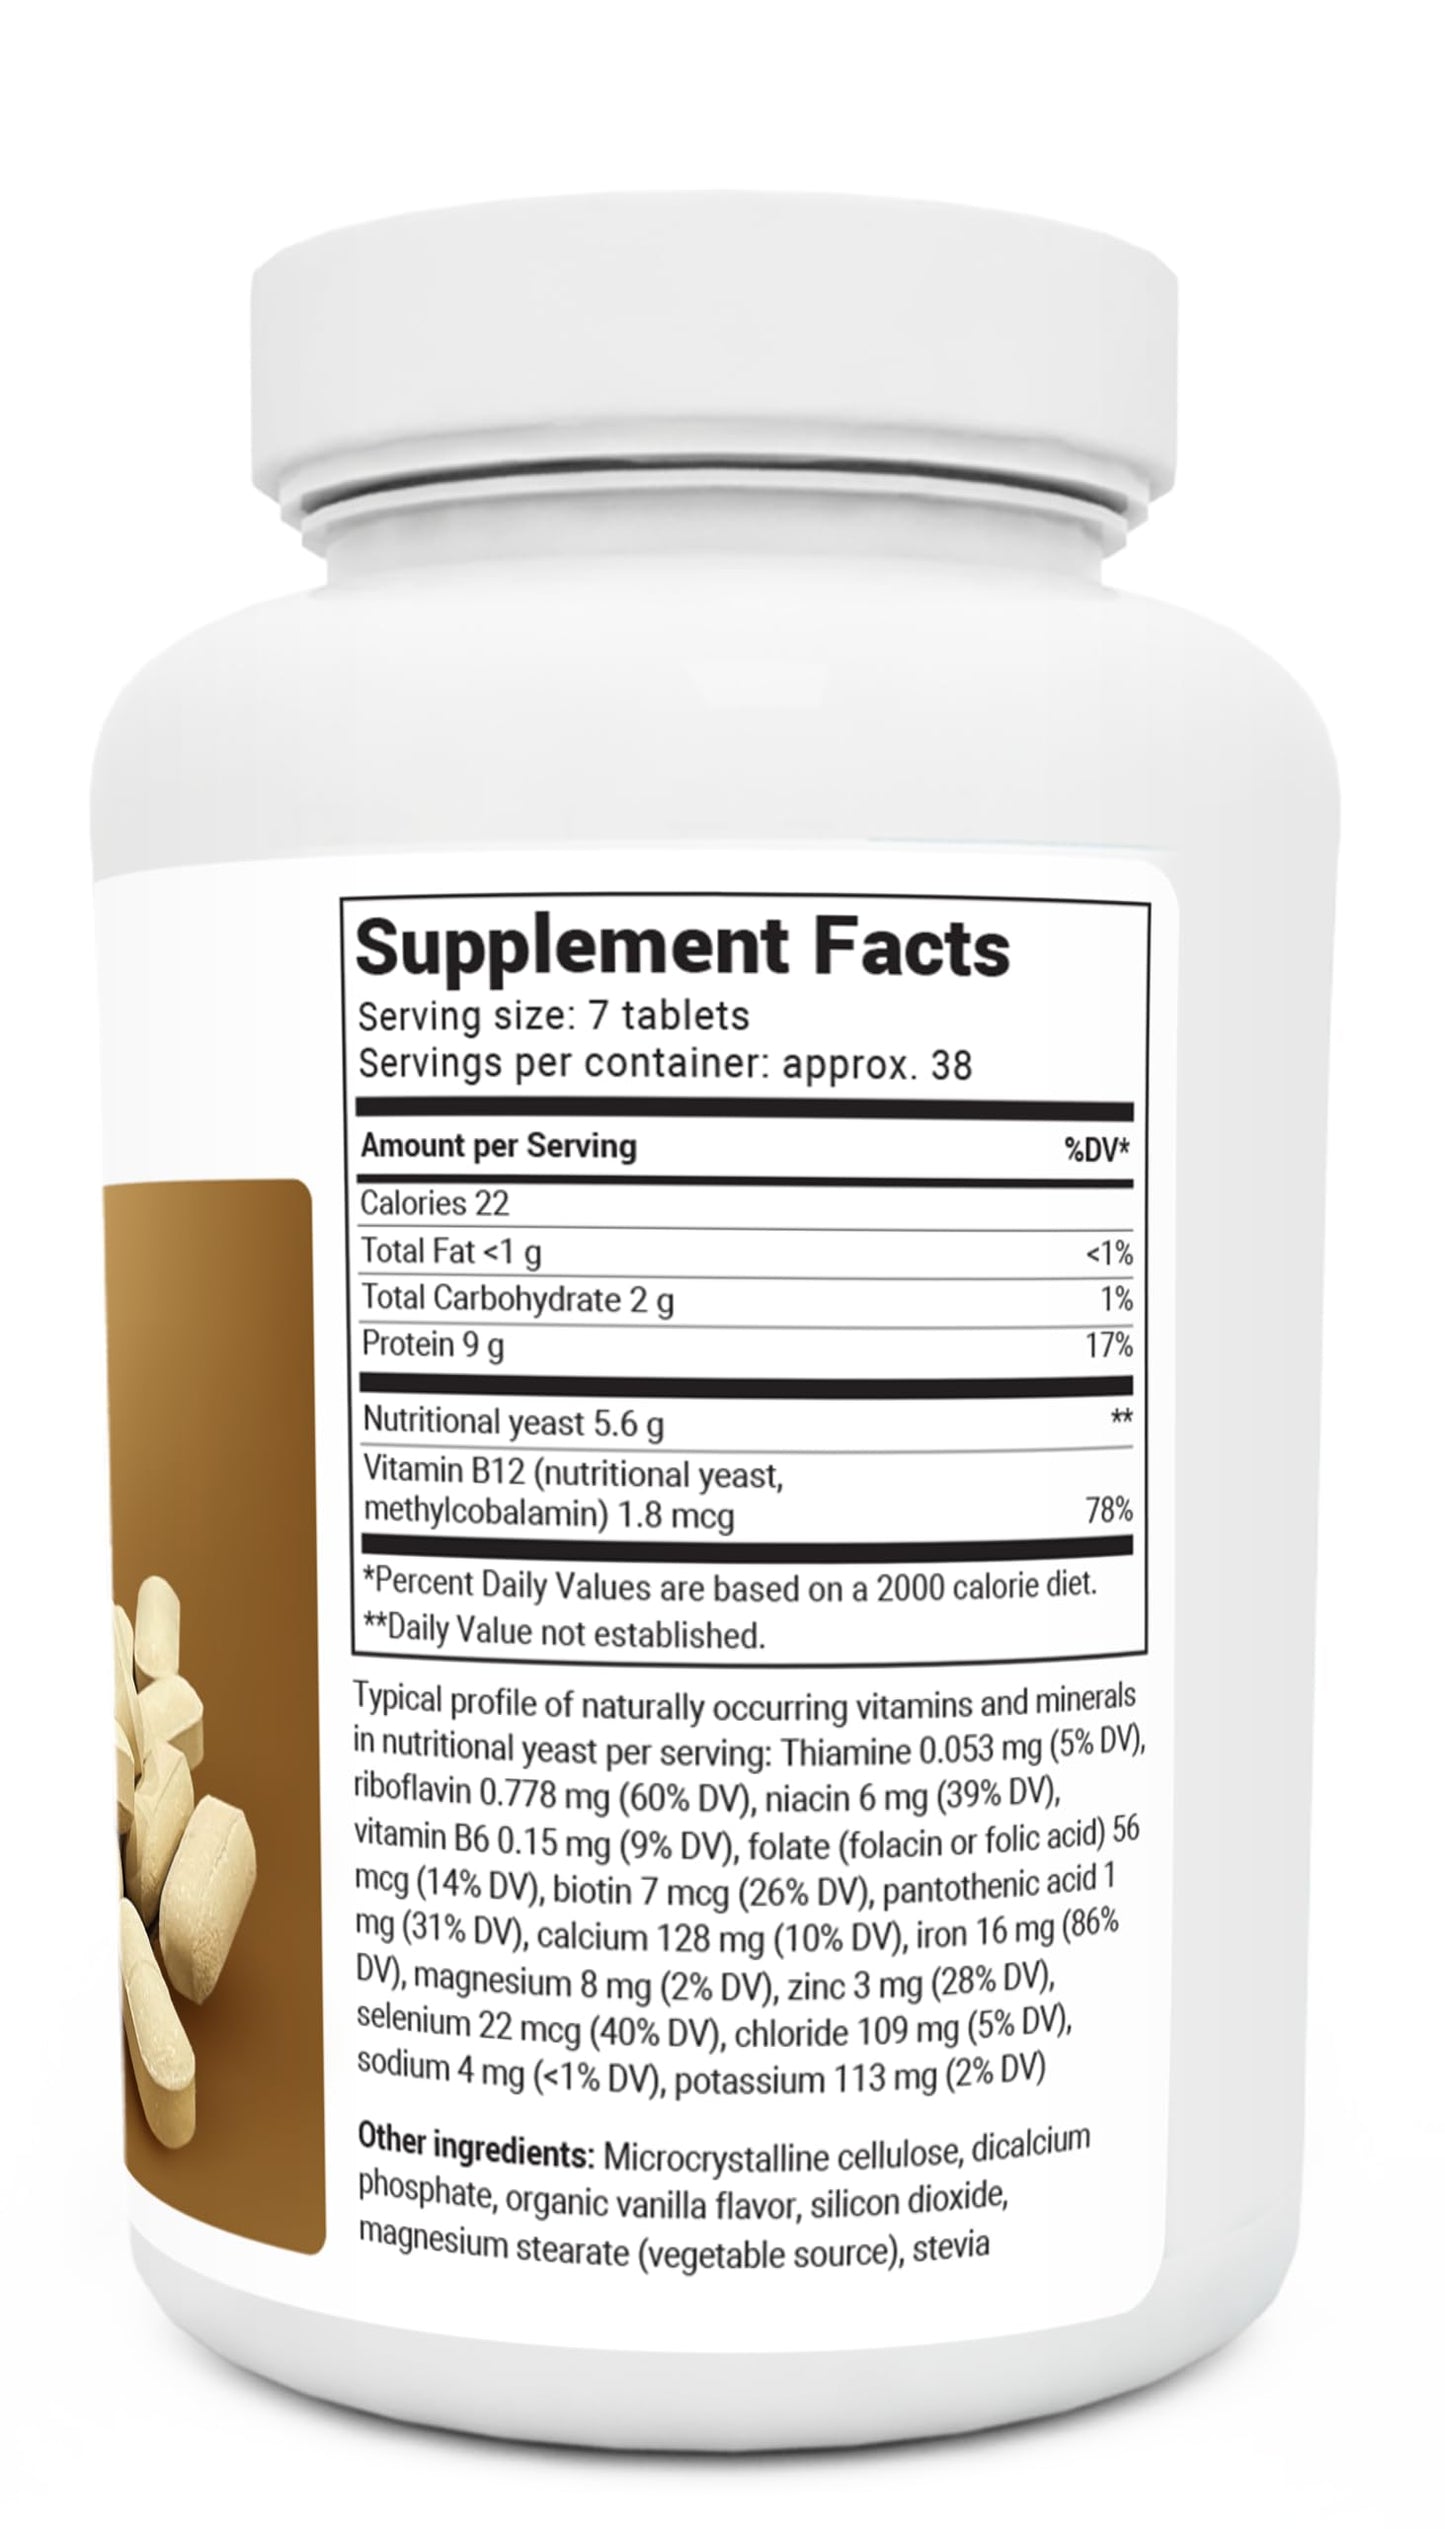 Dr. Berg's Nutritional Yeast Tablets – Non-Fortified Natural B12 Added - with All 8 B Vitamin Complex – No Gluten Non-GMO Non Synthetics - 270 Vegan Tablets Dietary Supplements